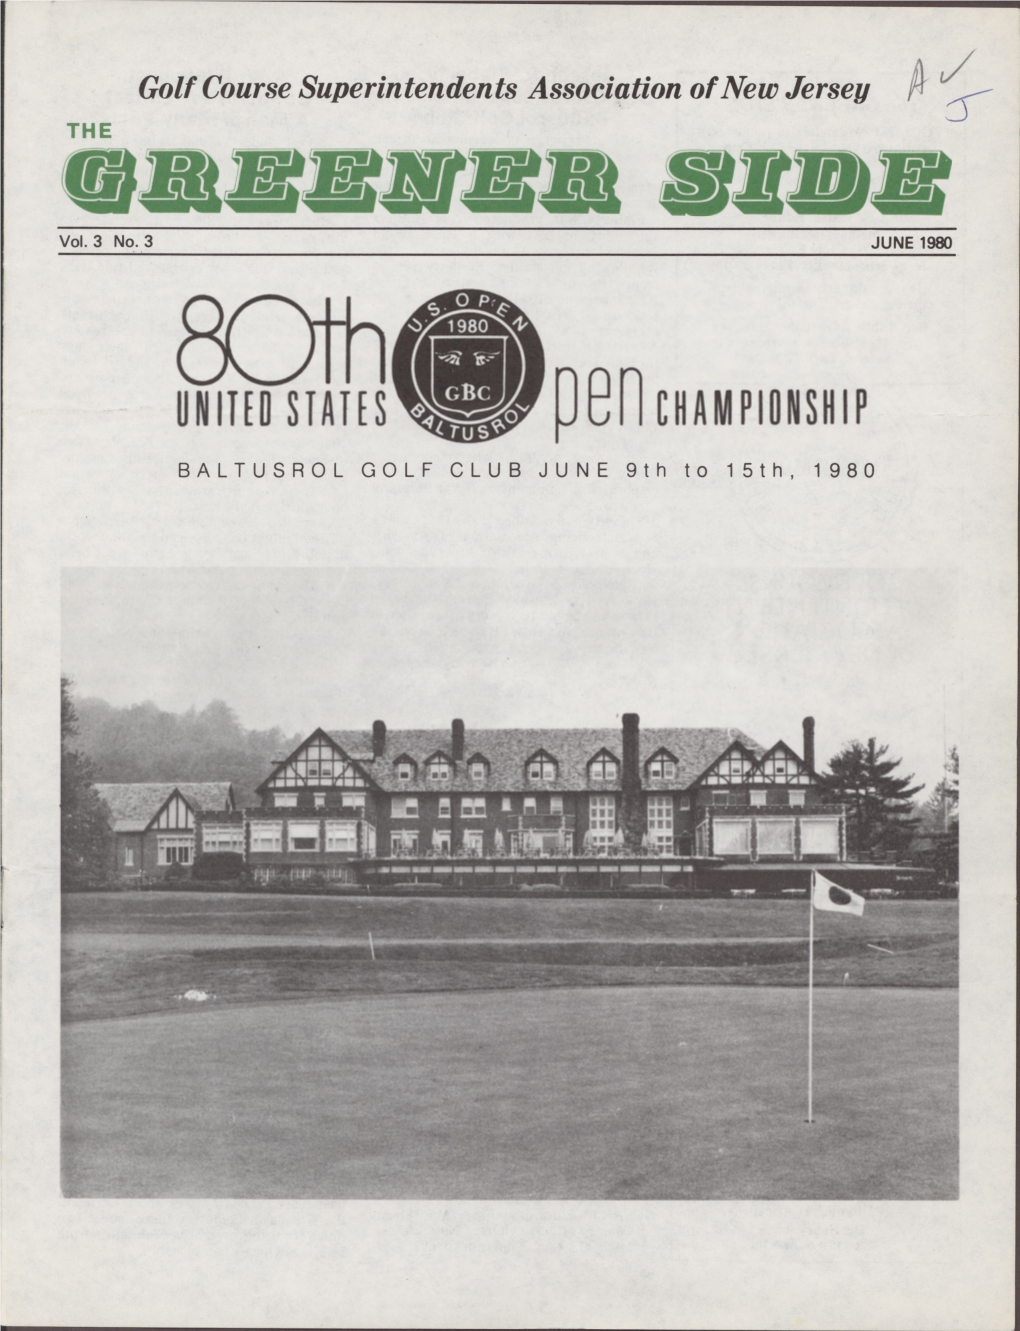 Golf Course Superintendents of New Jersey the Greener Side Vol. 3 No.3